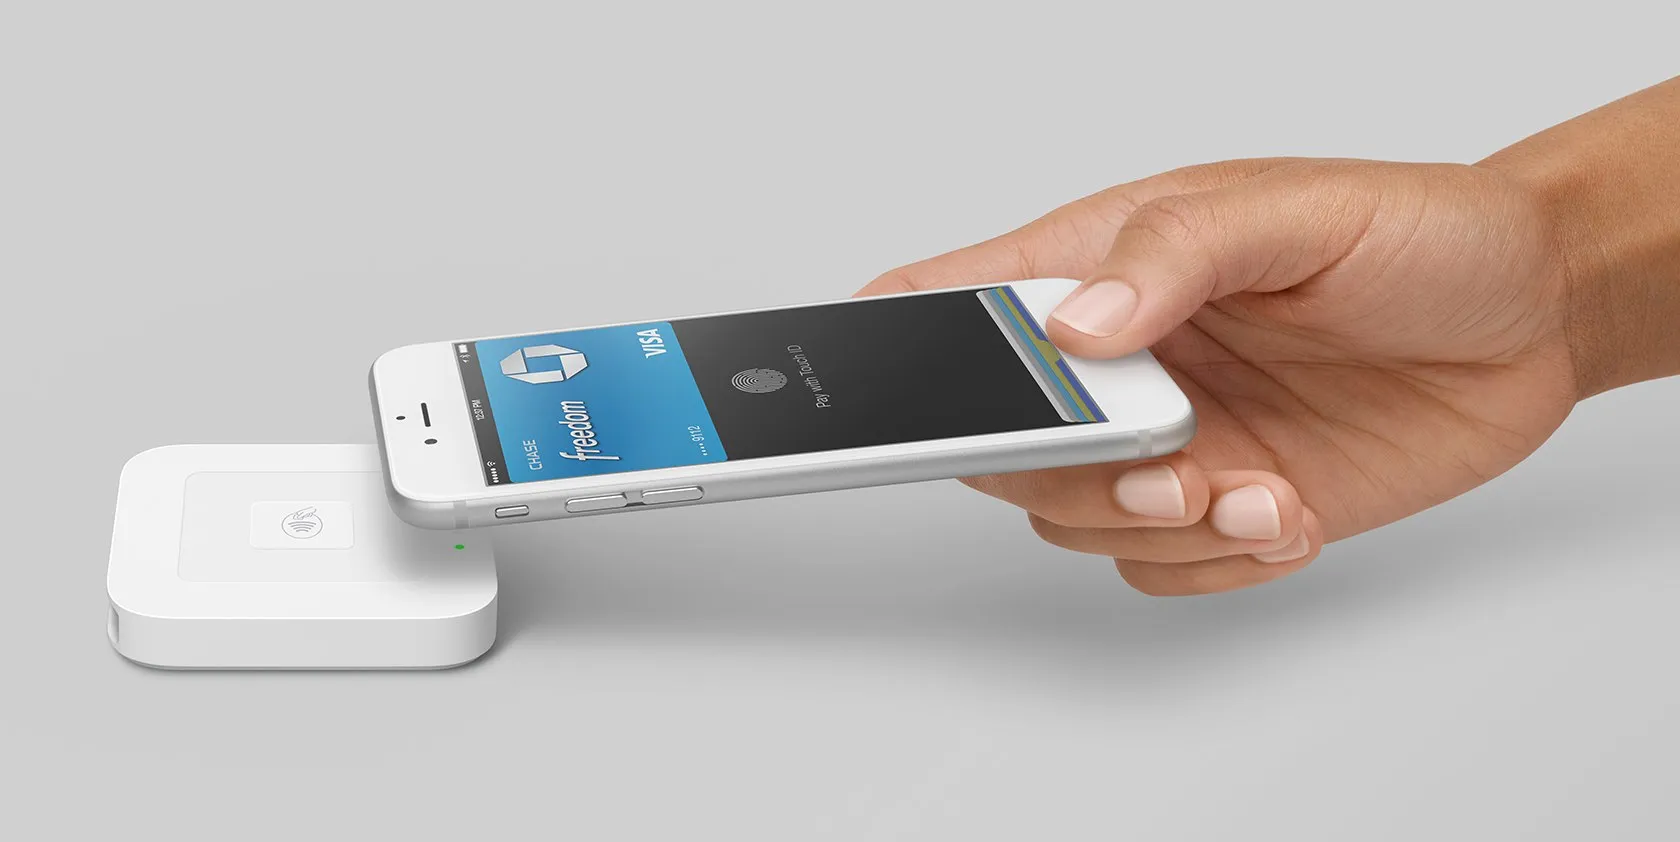 Does Square Take Apple Pay?